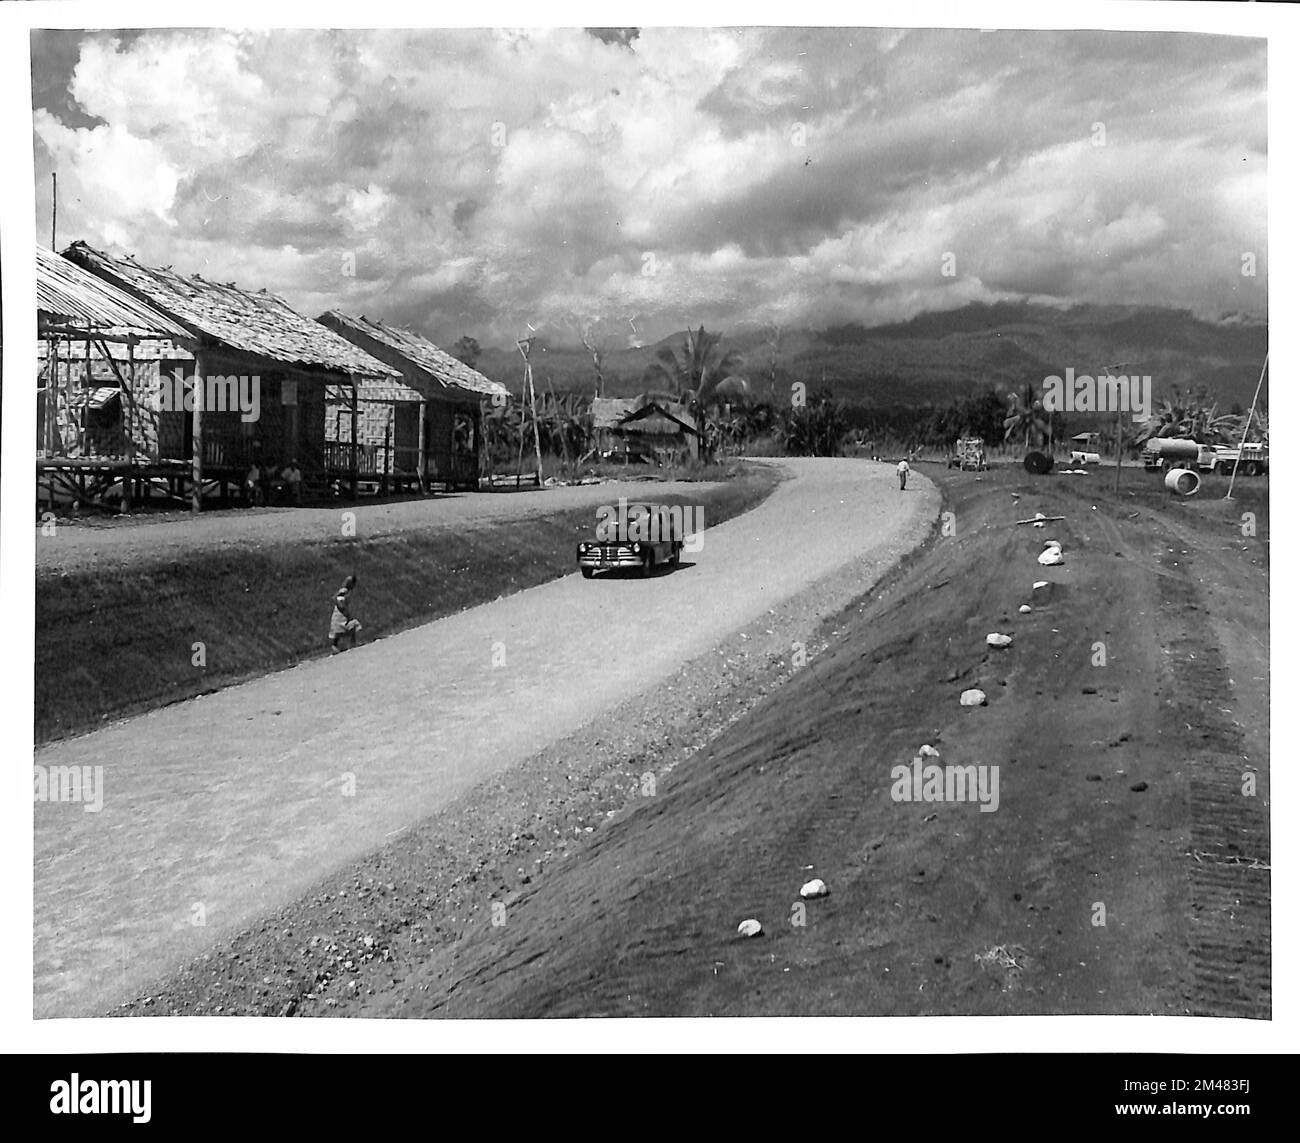 Completed Section Kidapawan - Calauag Road. Original caption: Completed section Kidapawan - Calauag Road. 8.0 meter shoulder to shoulder subgrade. 6.0 meter select material surfacing. Taken by C. N. Aldrich. State: Philippines. Place: Cotabato. Stock Photo